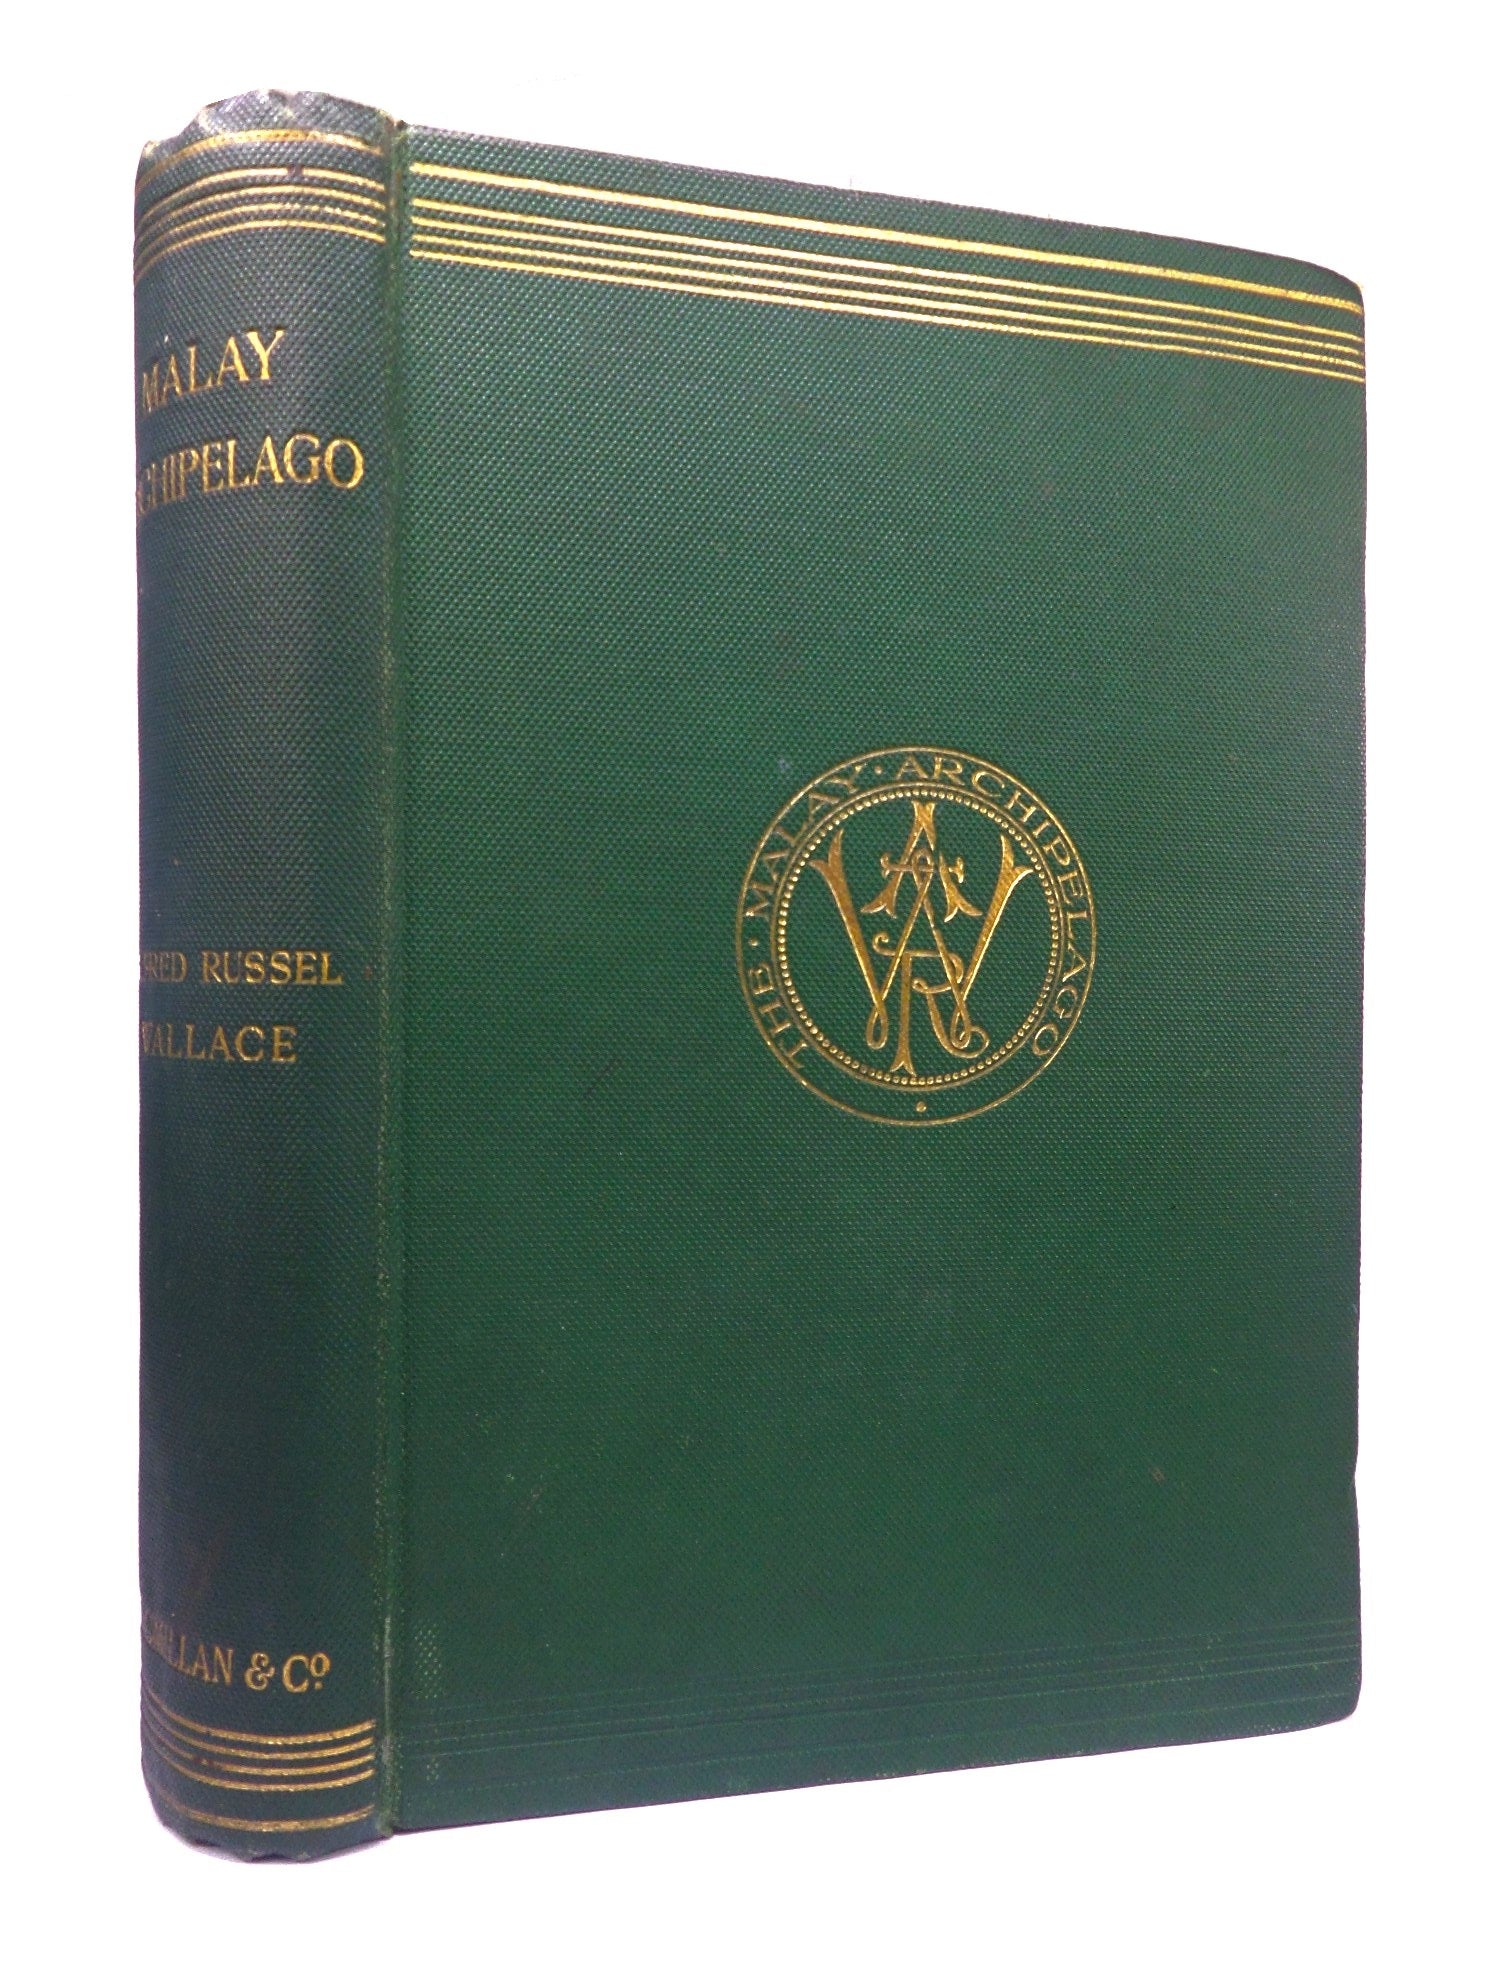 THE MALAY ARCHIPELAGO BY ALFRED RUSSEL WALLACE 1898 NEW EDITION